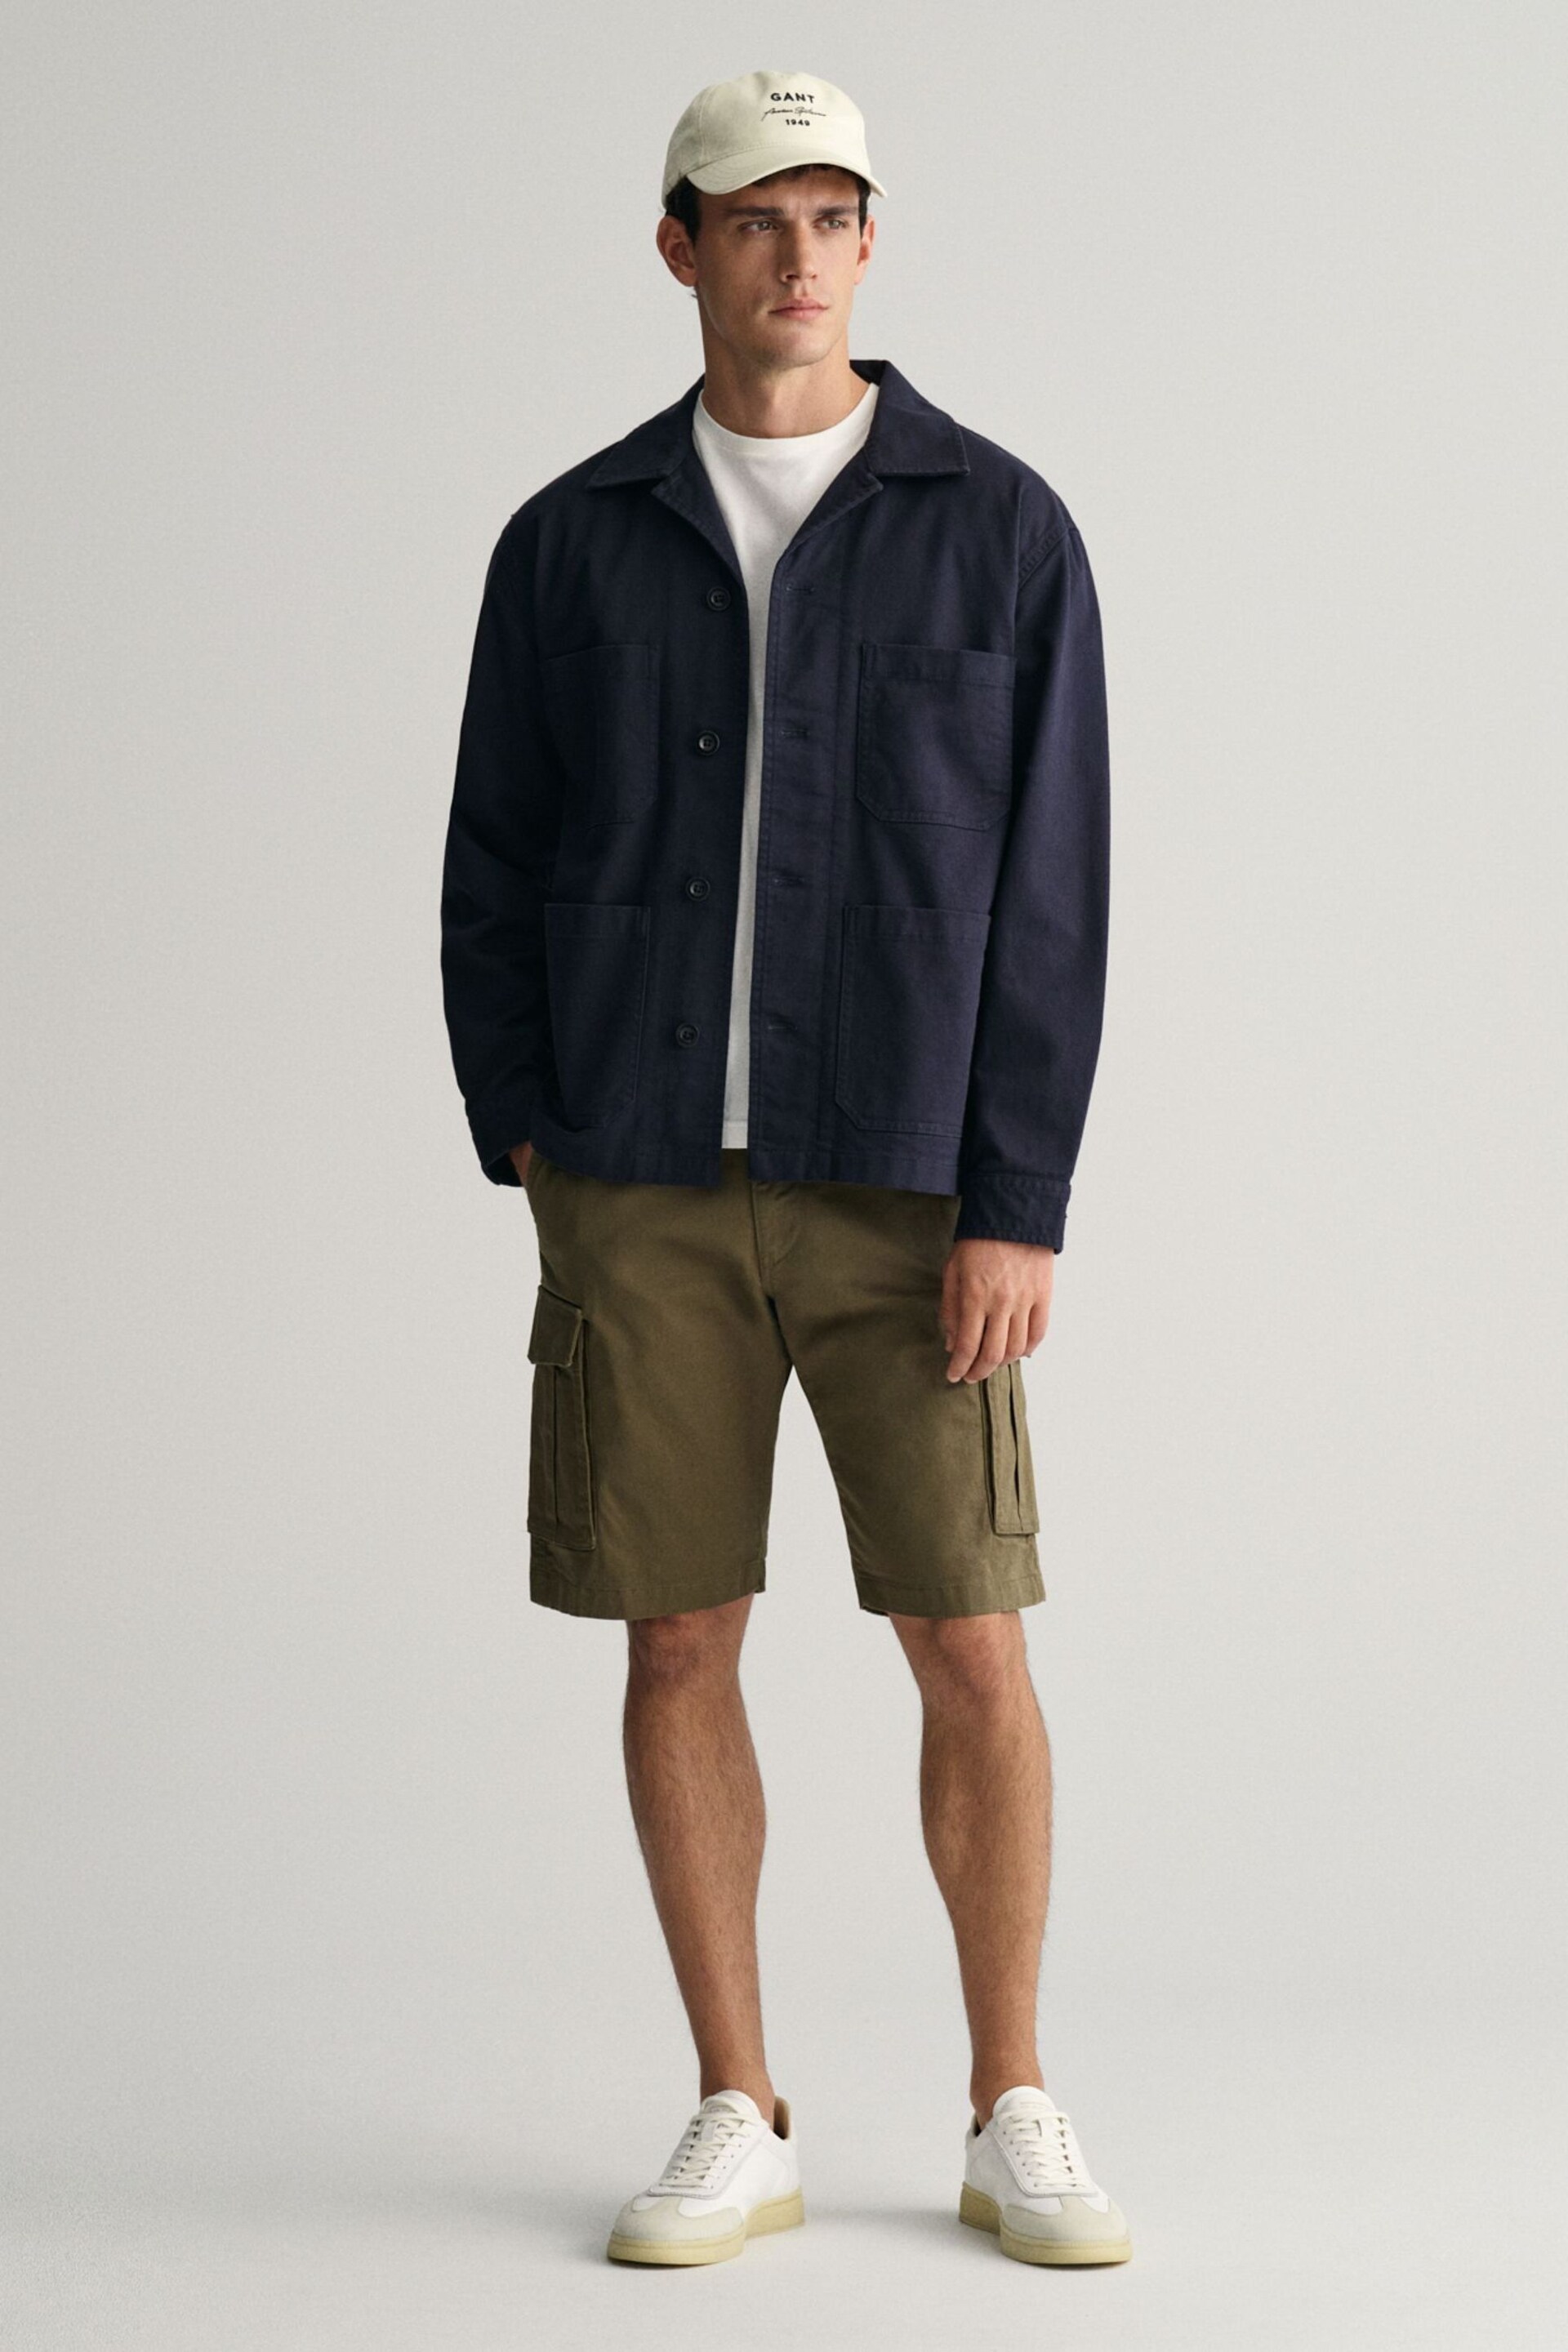 GANT Green Relaxed Twill Cargo Shorts - Image 5 of 9